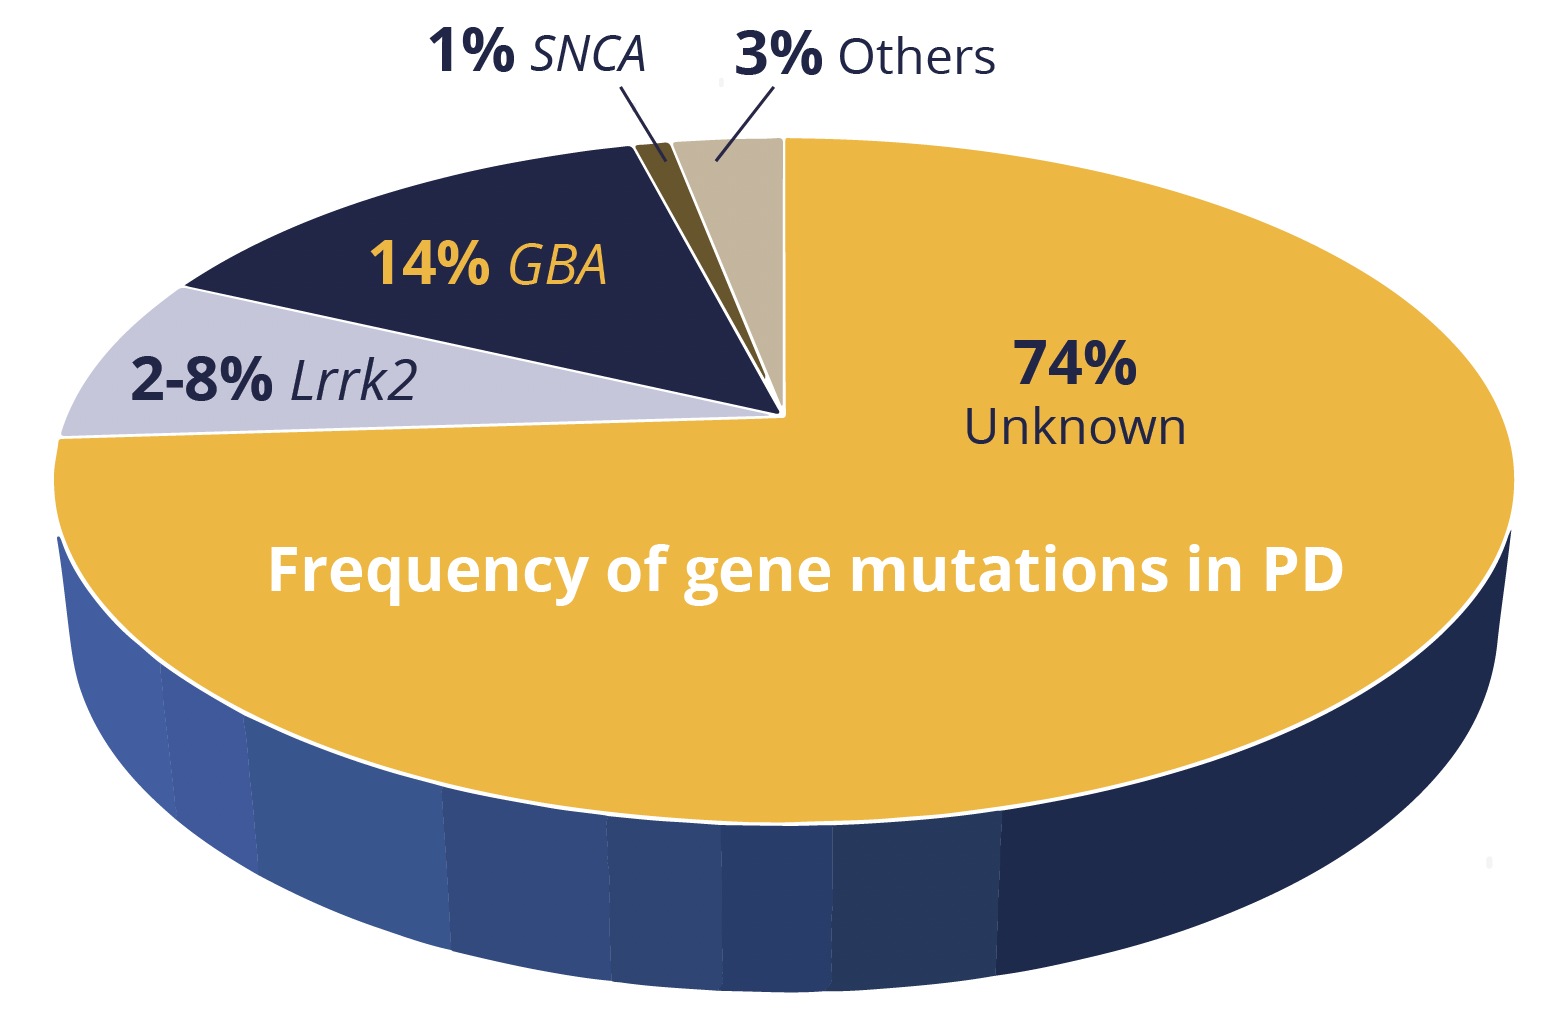 The frequency of gene mutations in PD